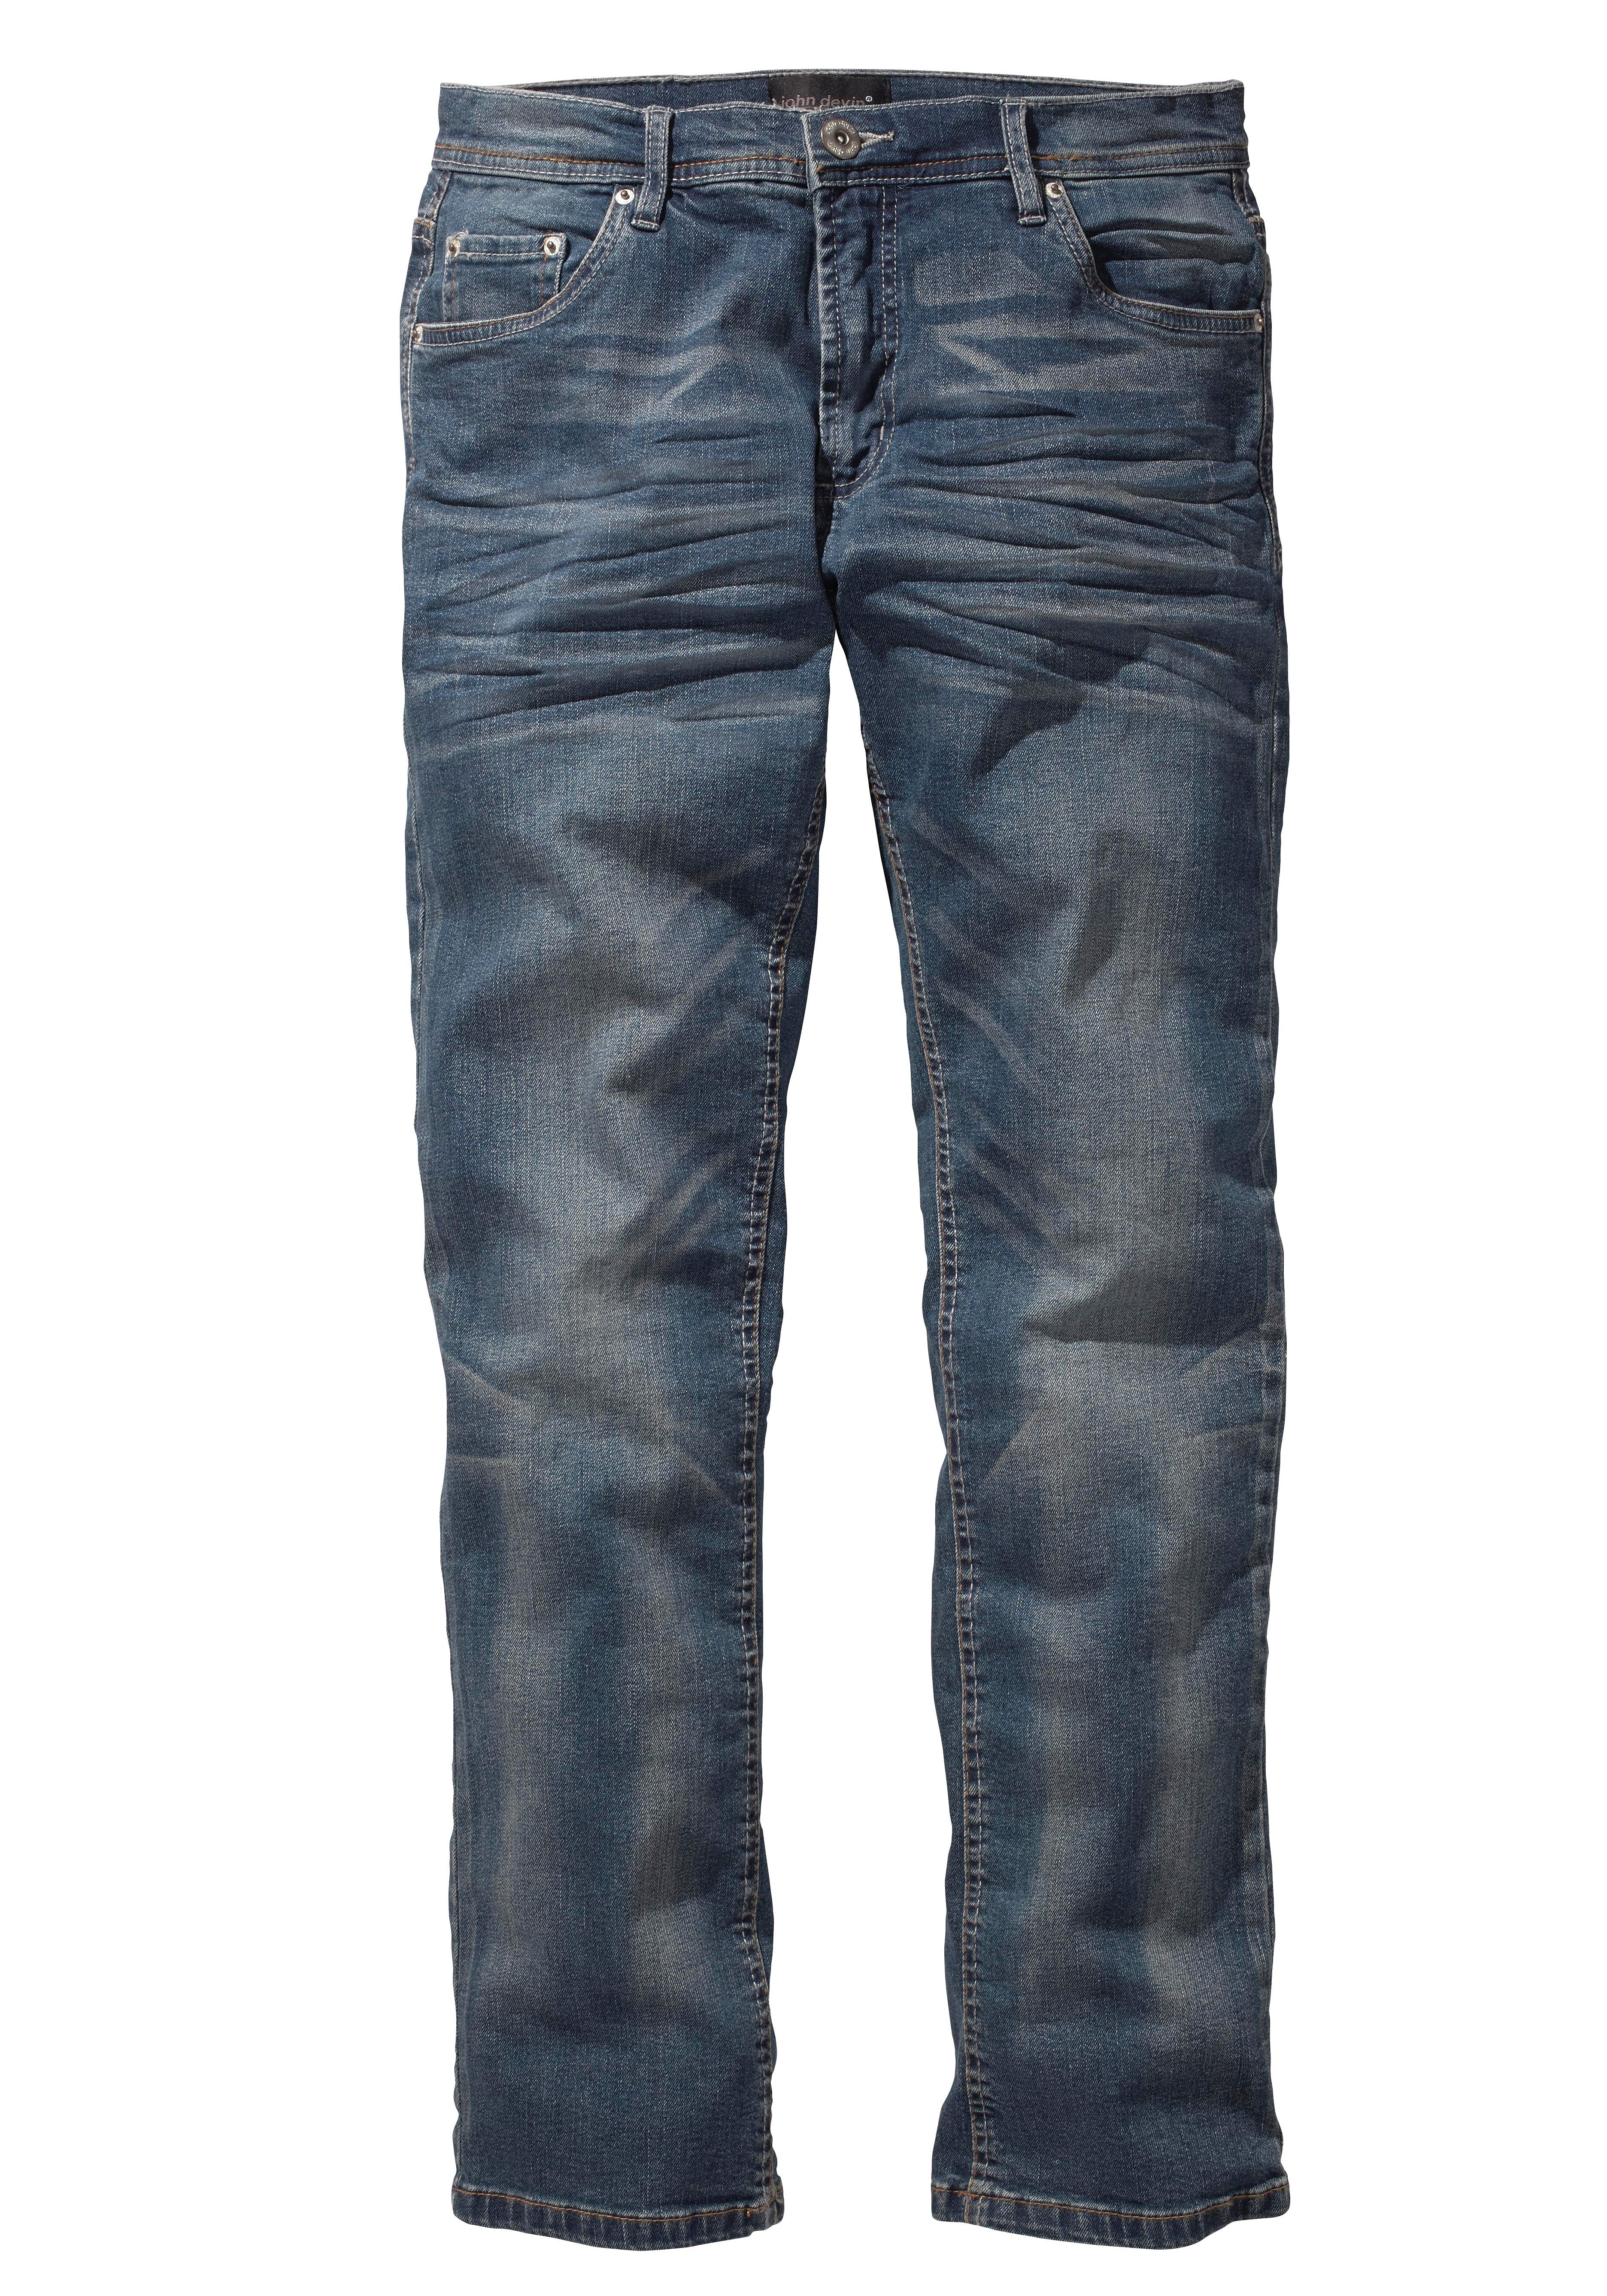 Otto - John Devin NU 15% KORTING: JOHN DEVIN Straight Fit-jeans in used-wassing